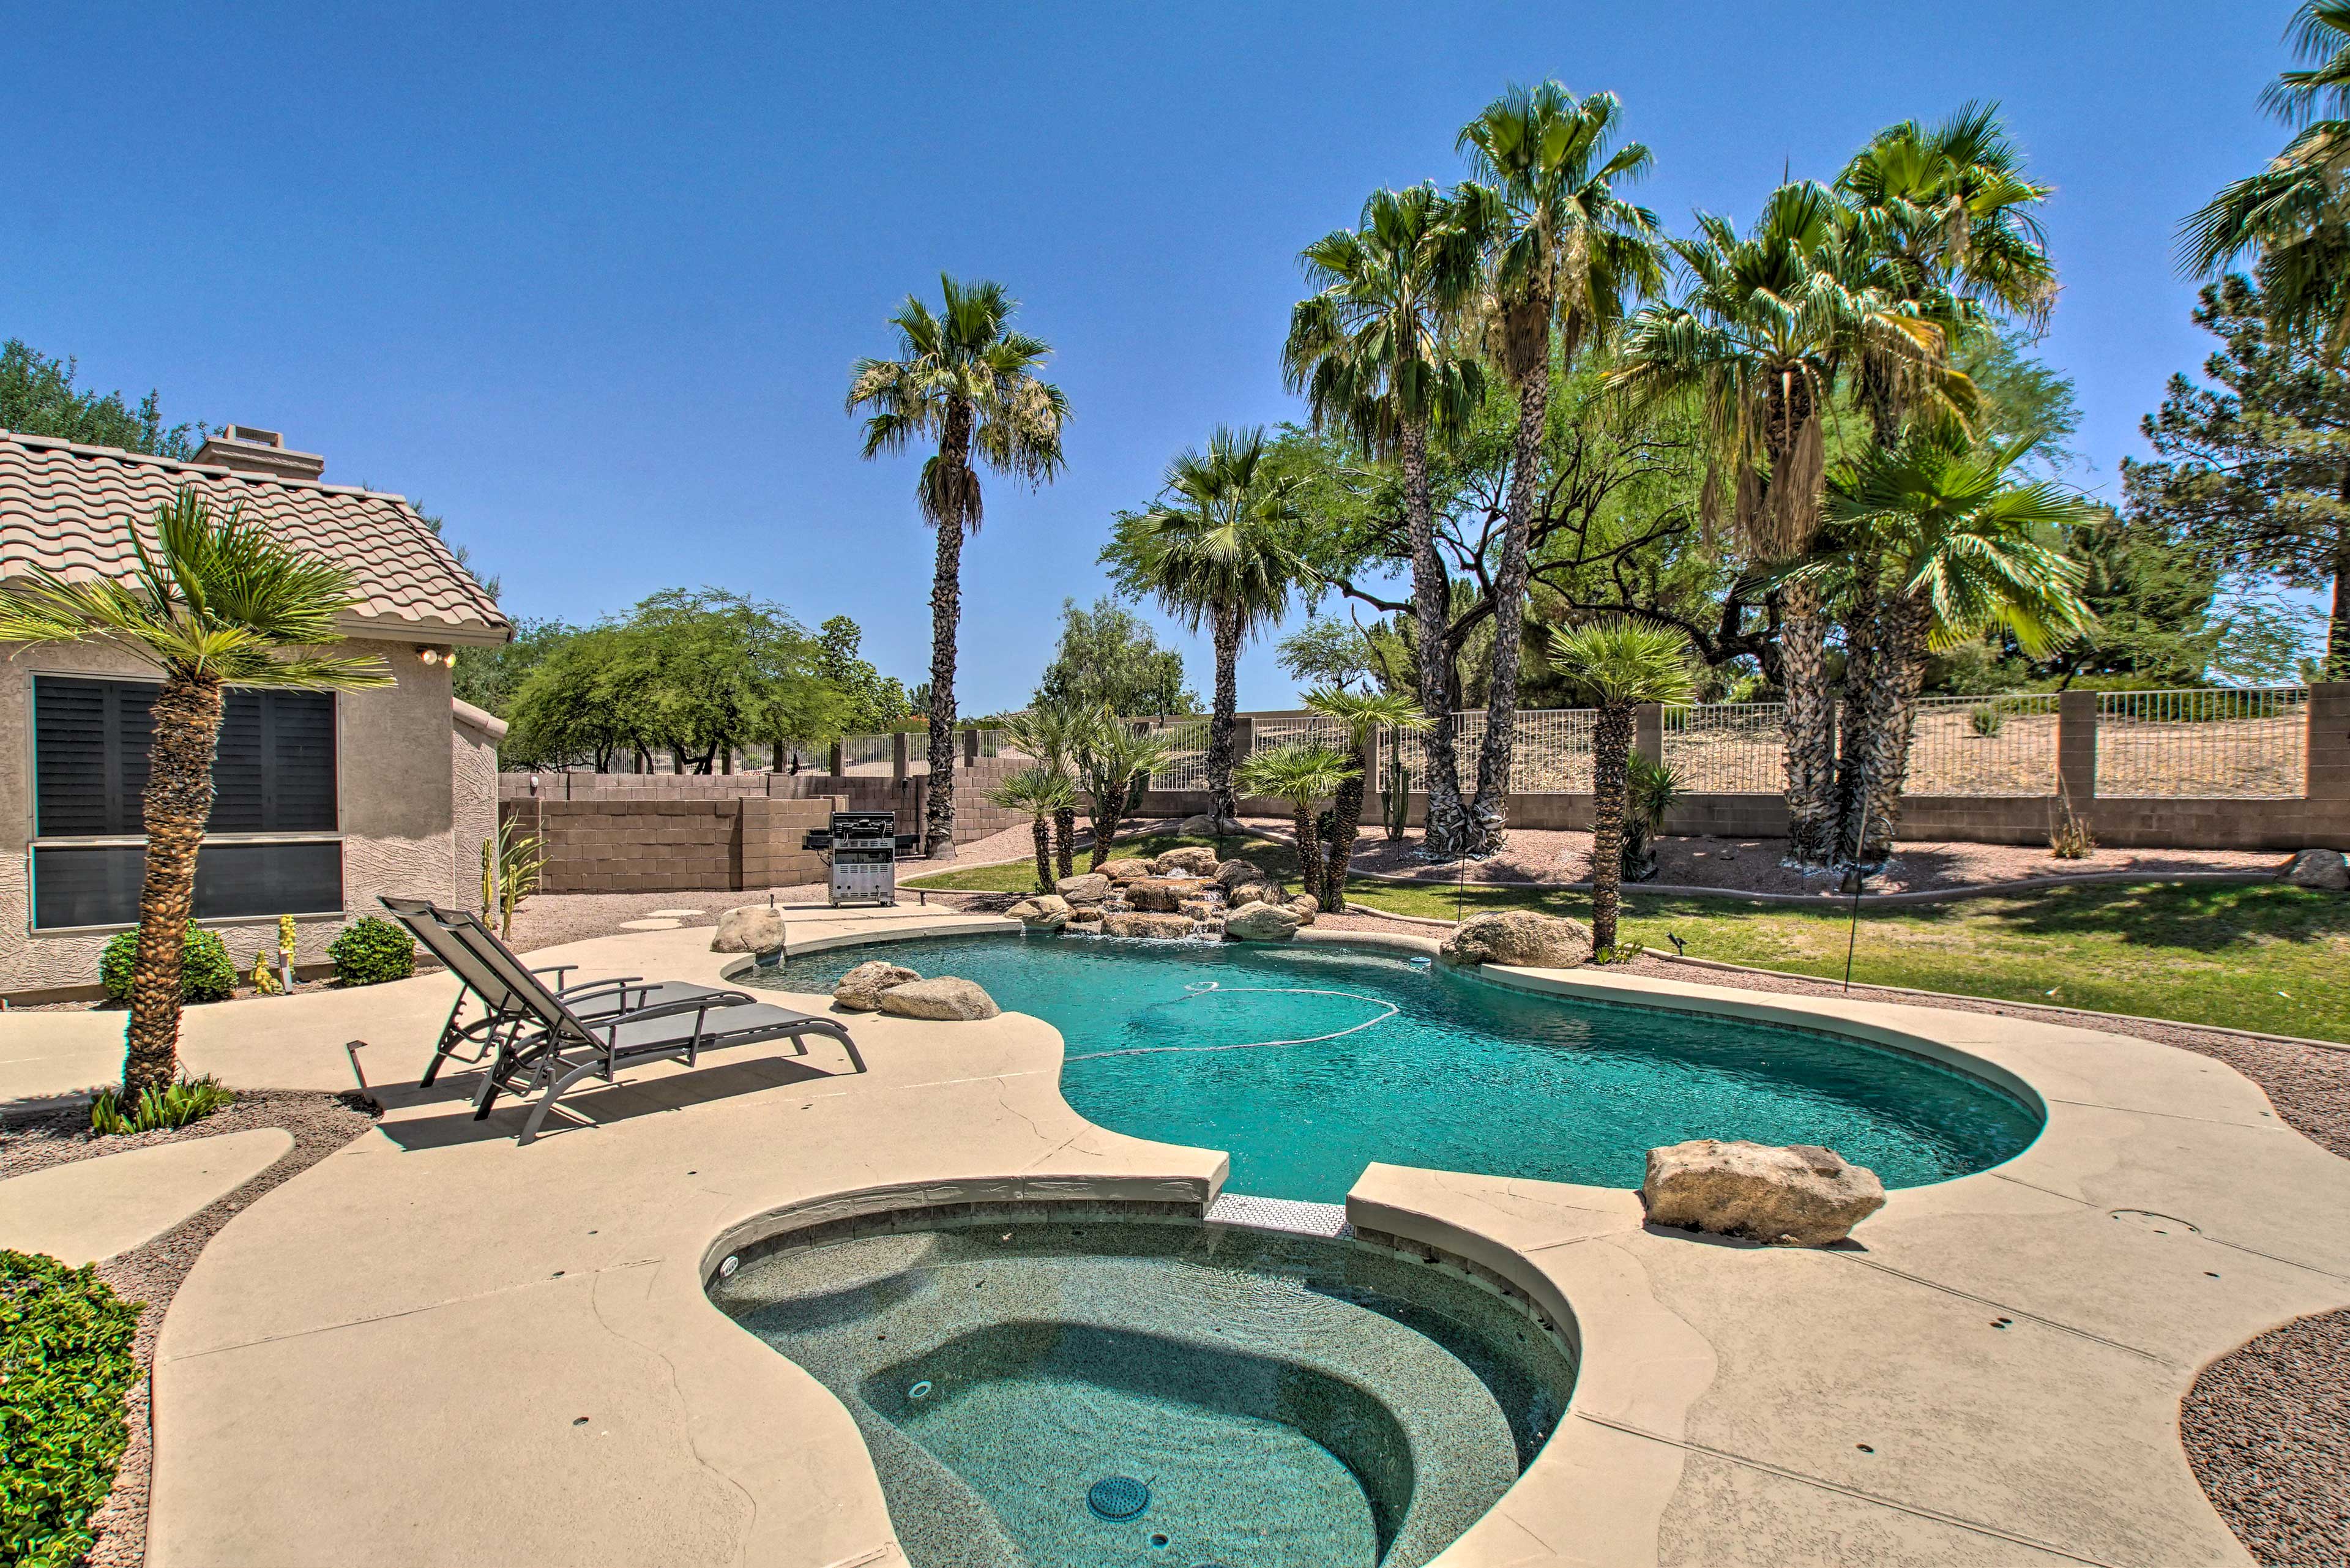 Ideally Located Chandler Home w/ Pool & Hot Tub!